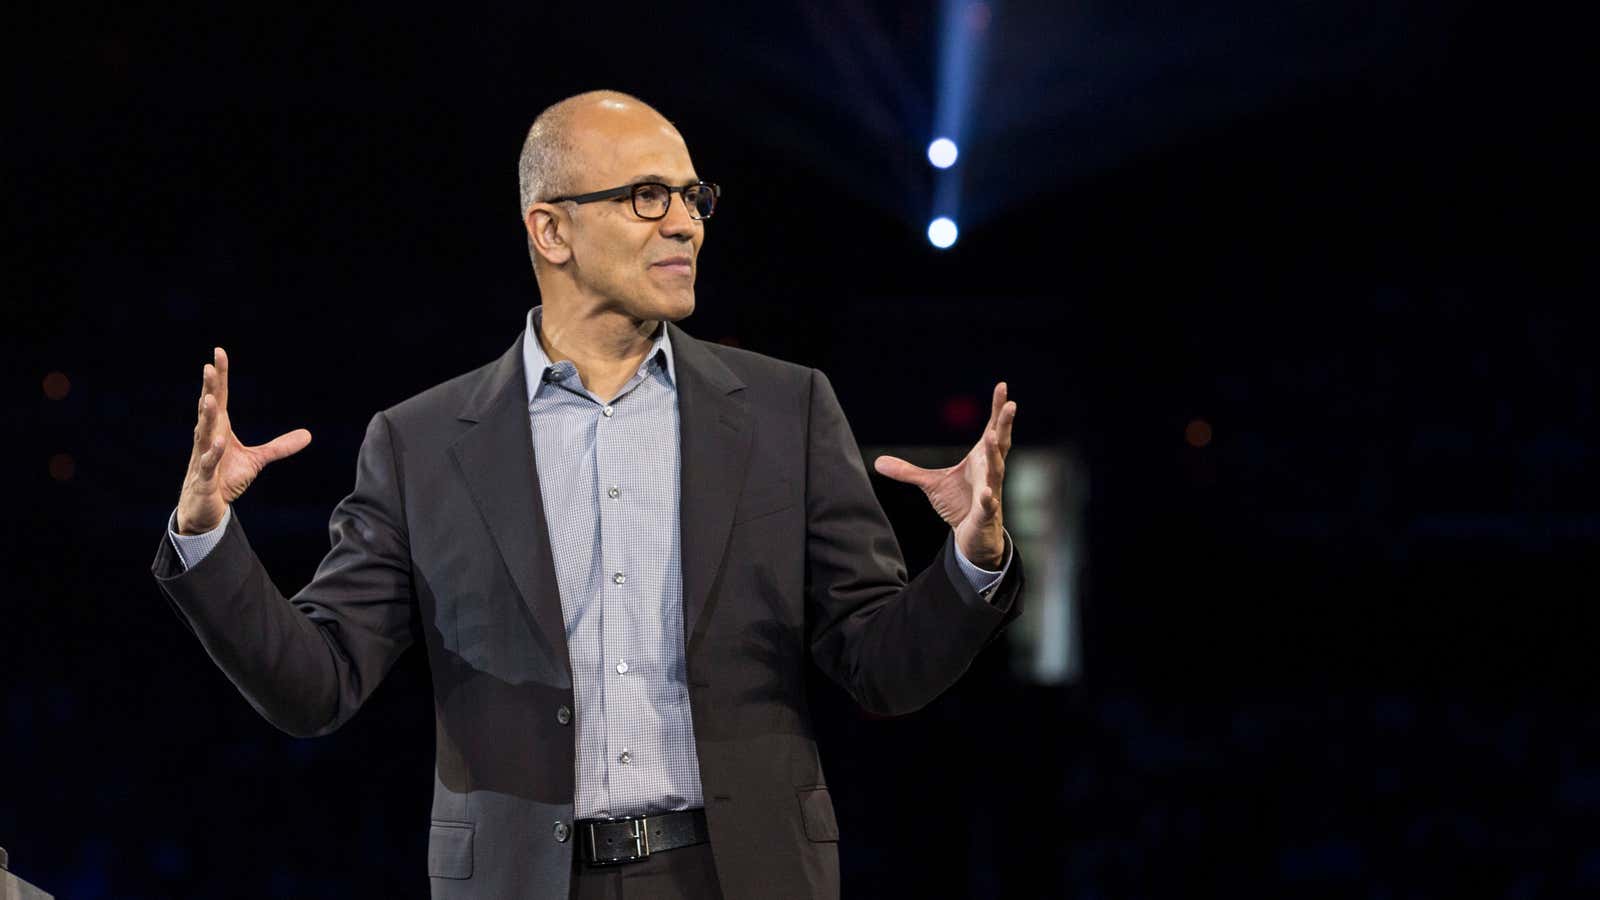 Nadella is redesigning Microsoft.